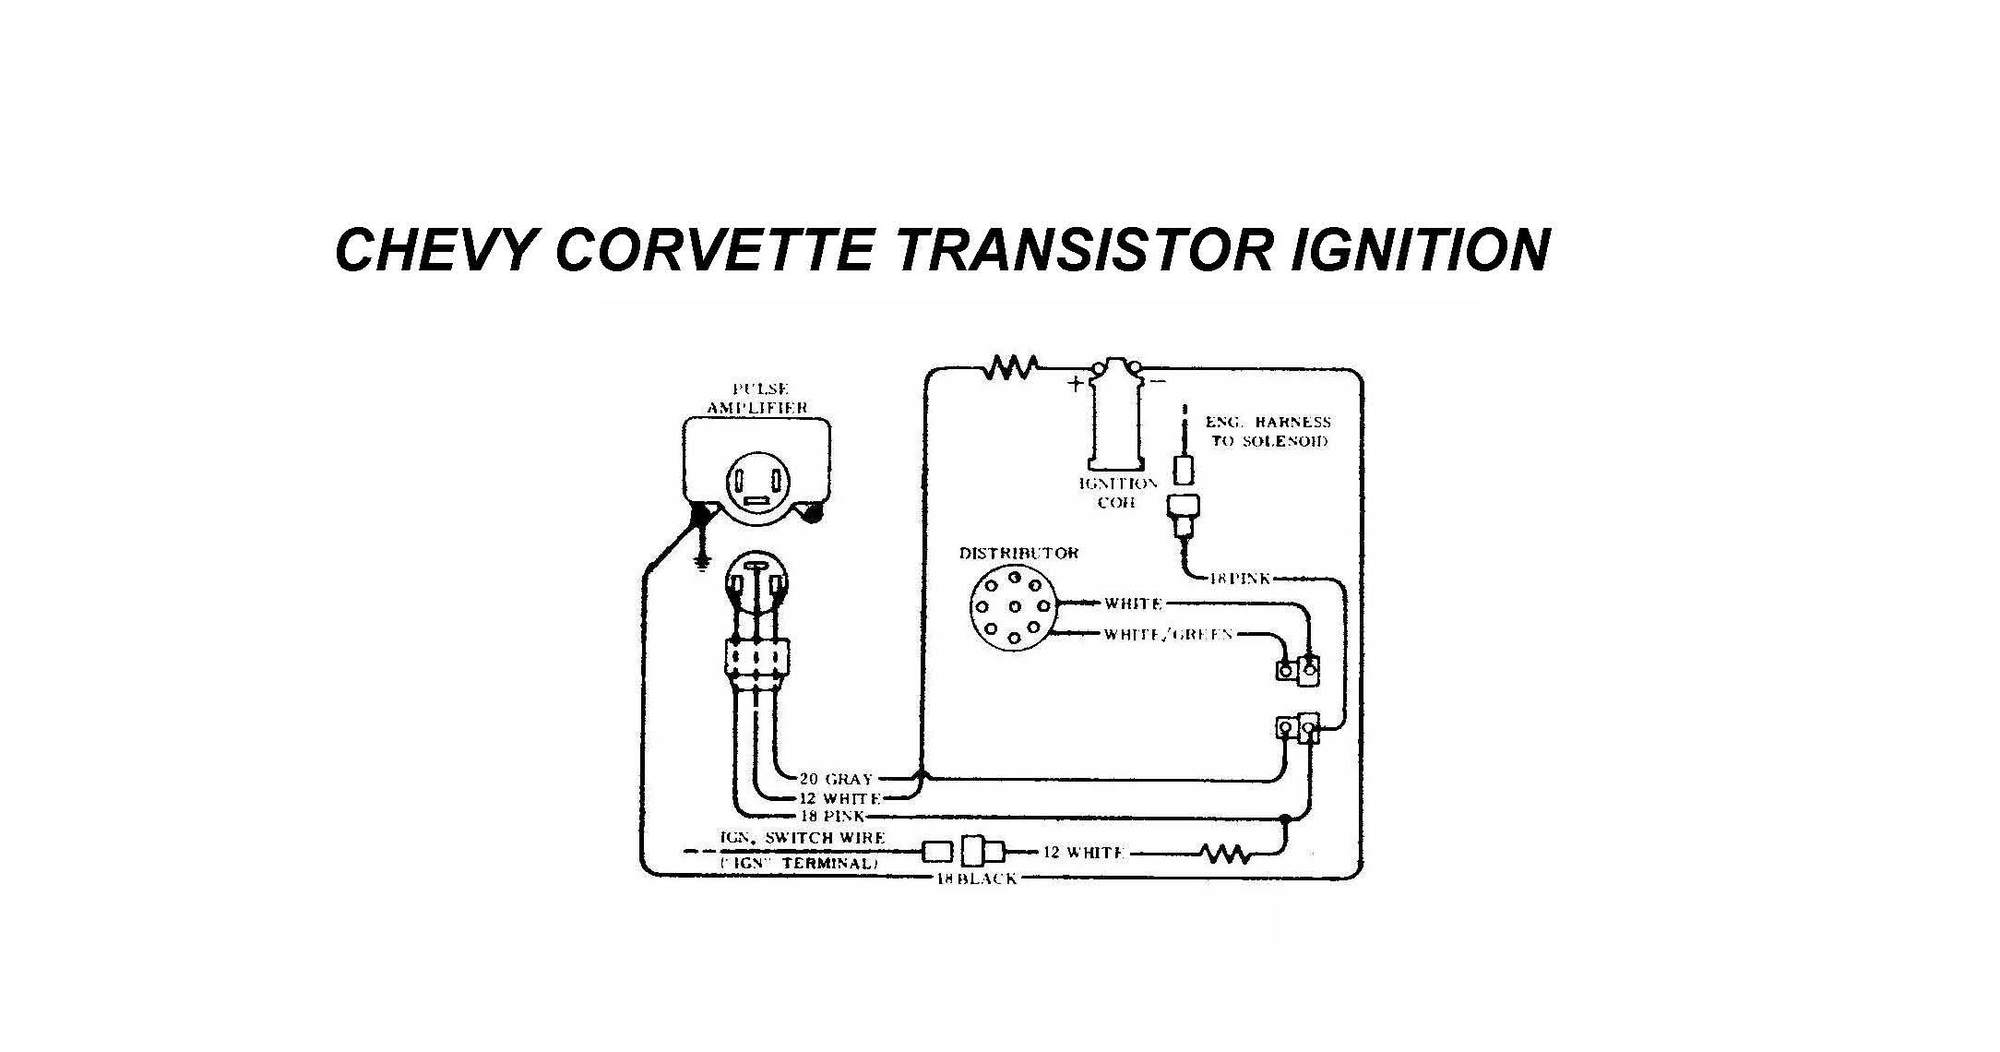 1969 Chevy Ignition Switch Wiring / 67 Gm Ignition Switch Wiring